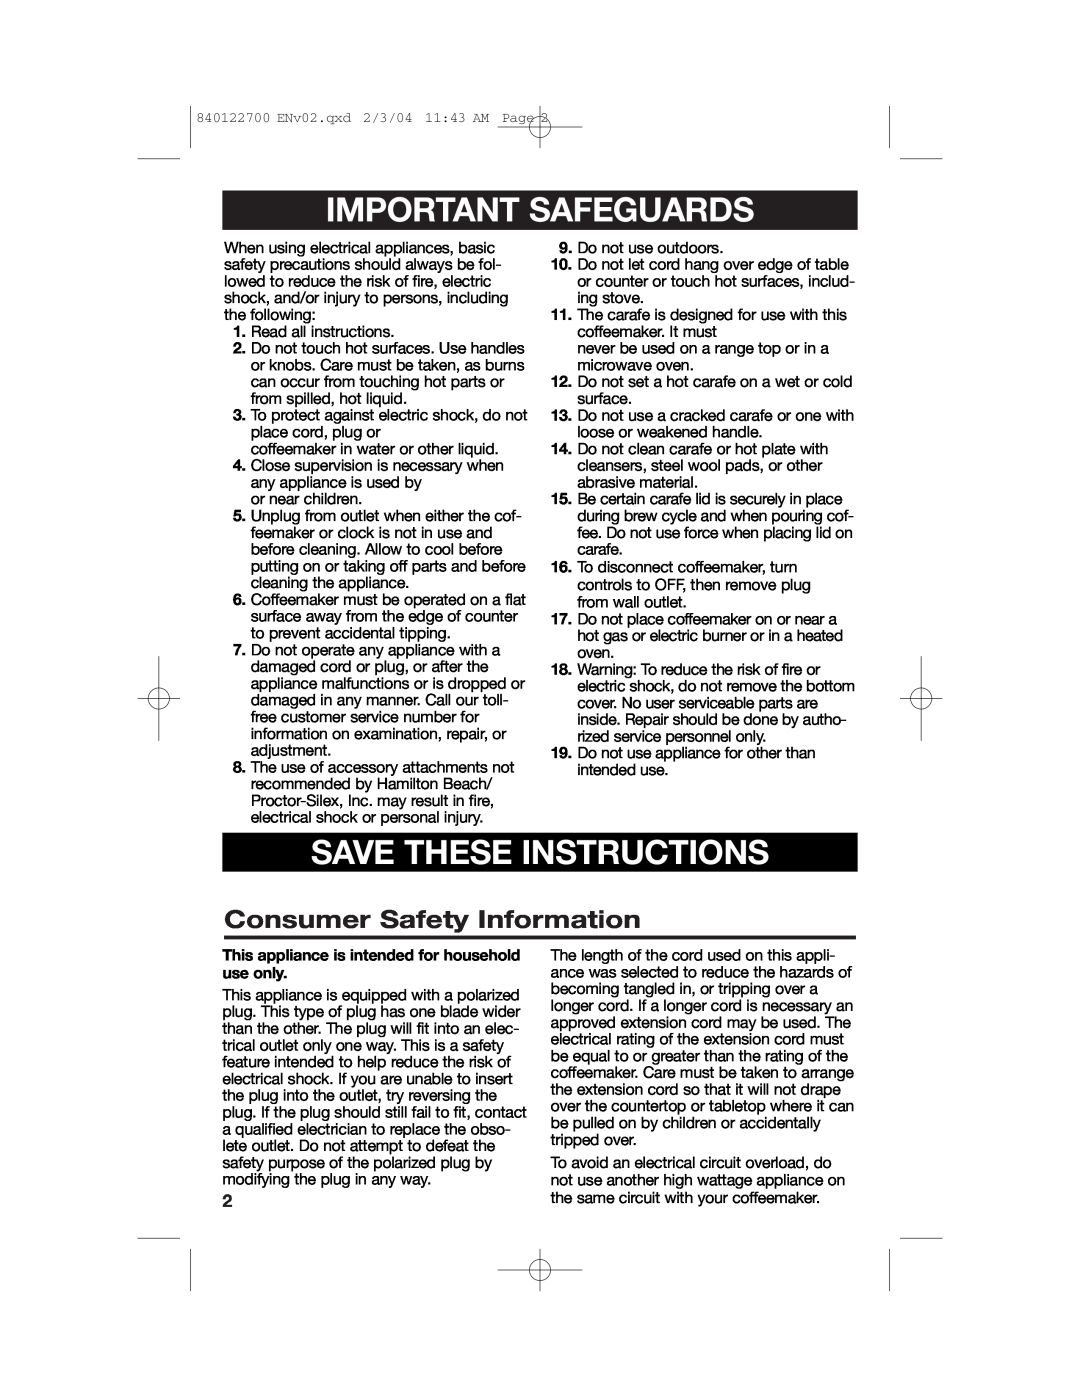 Hamilton Beach Coffemaker manual Important Safeguards, Save These Instructions, Consumer Safety Information 